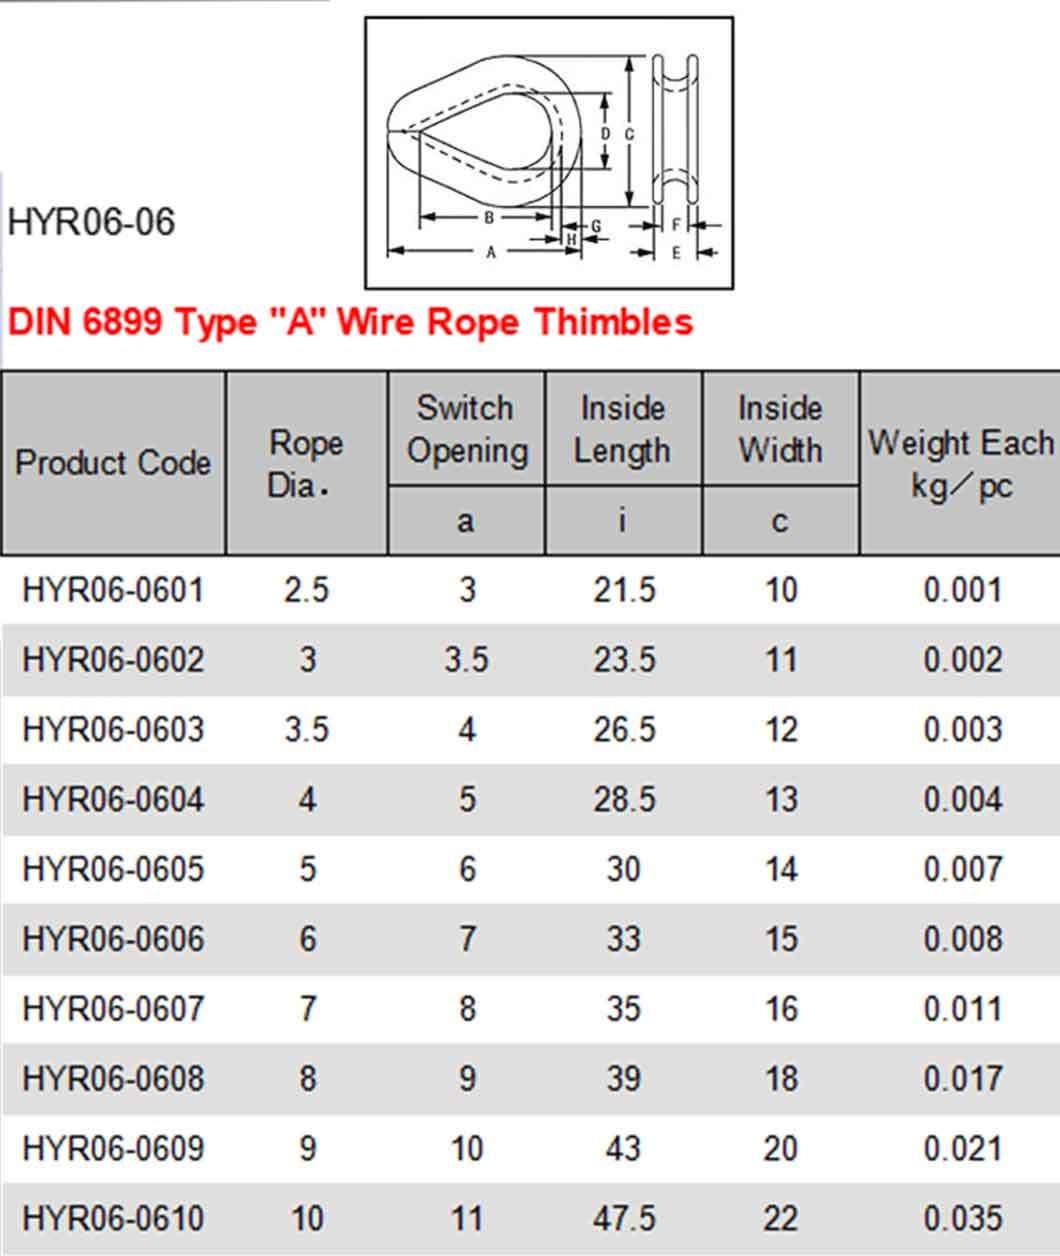 European Commercial Type Thimble for Rigging Hardware